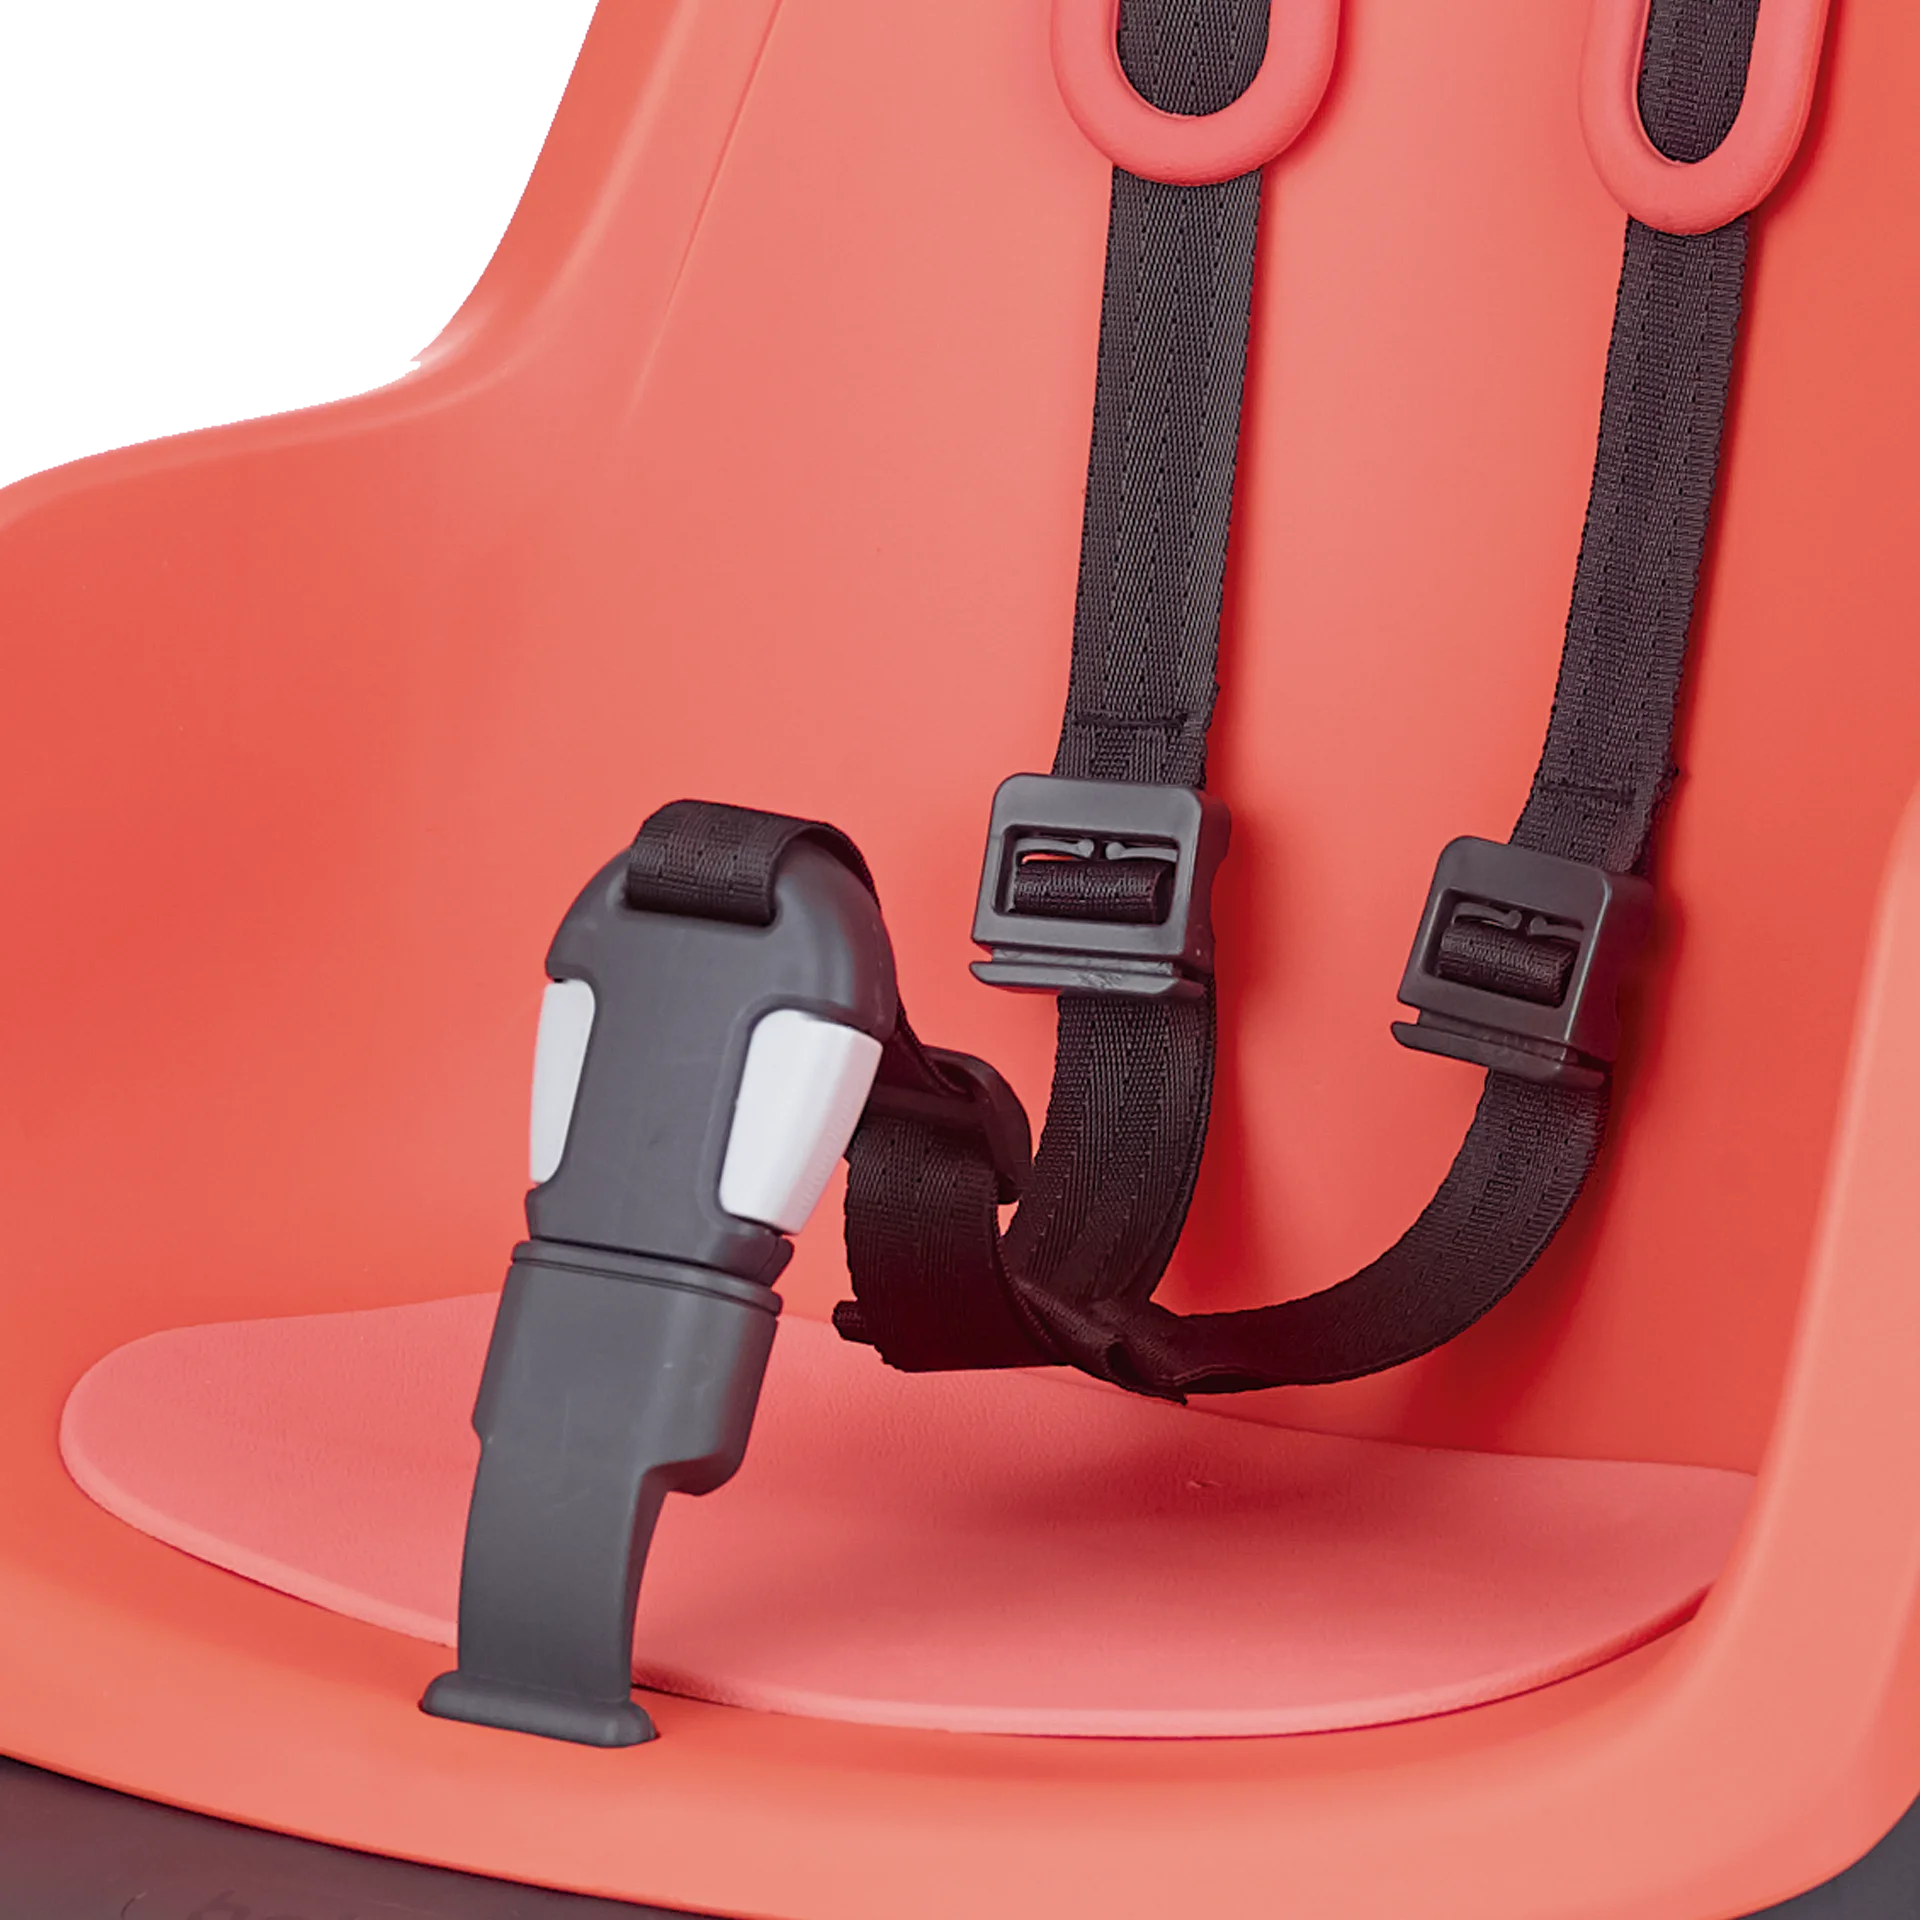 Rear bicycle safety seat, with a safety-belt of 3-points and a soft cushion.